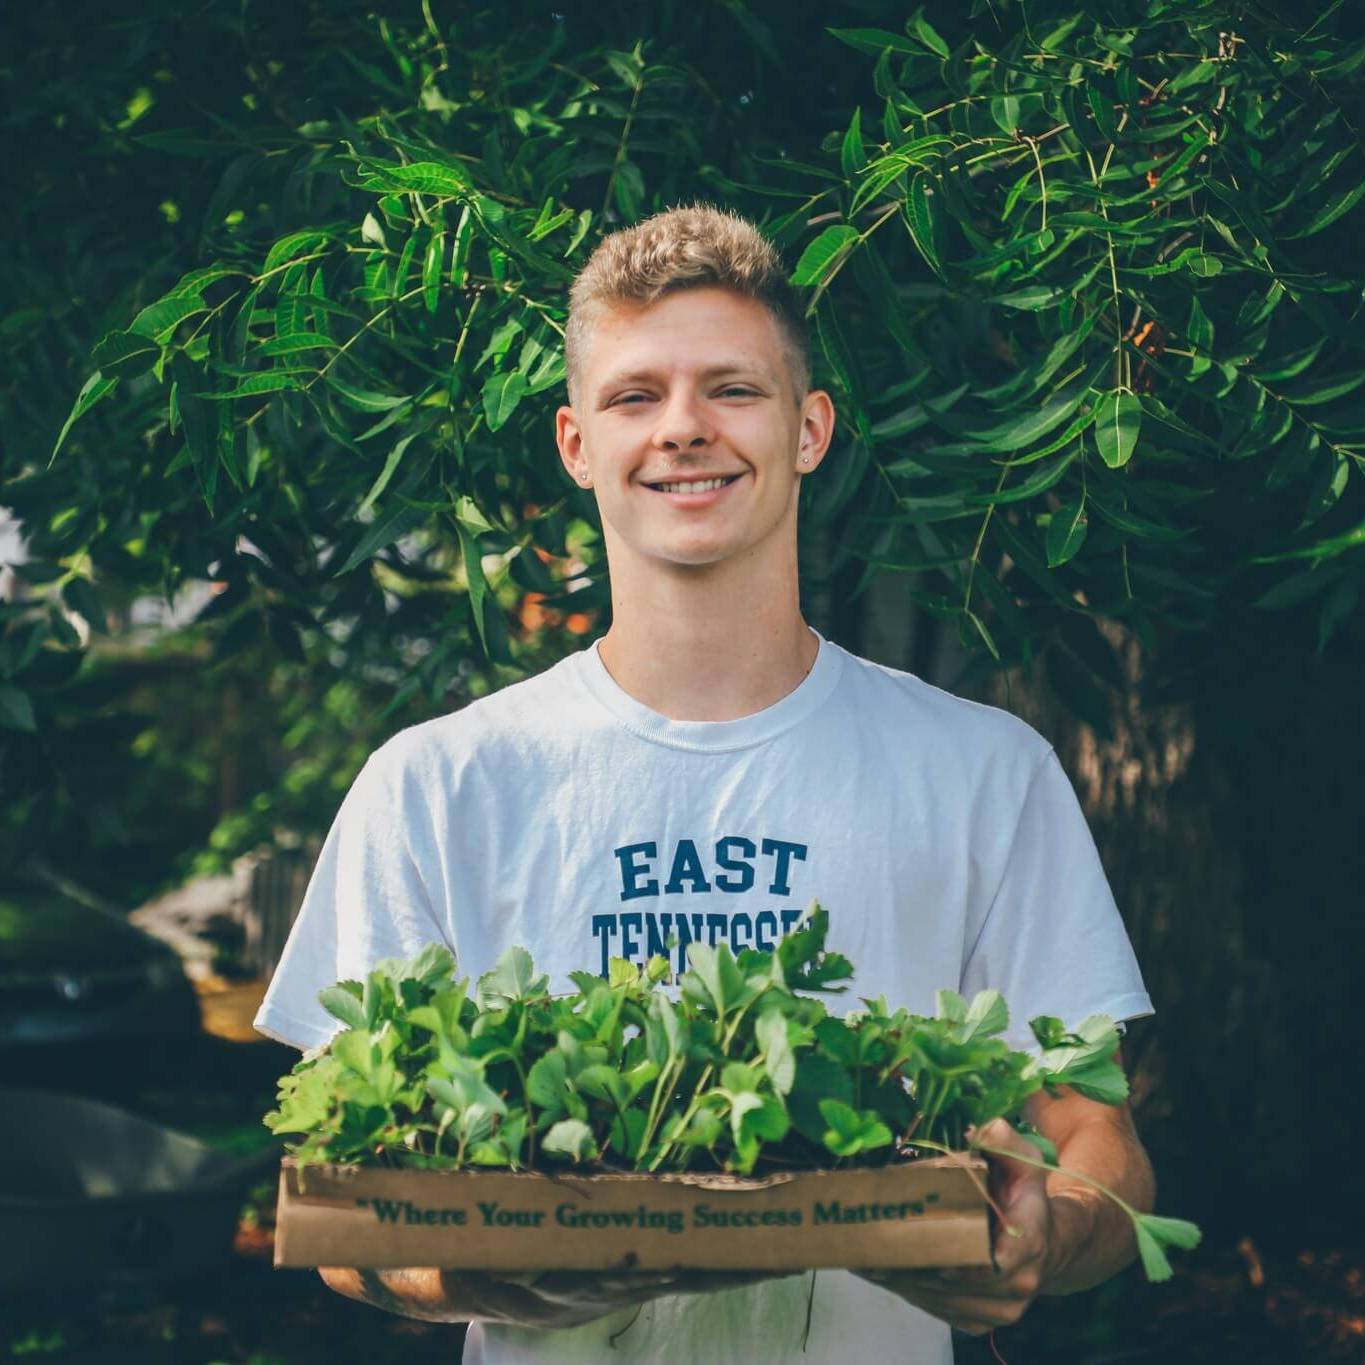 Male student in white shirt that reads "ETSU" holds a box of plants while volunteering outdoors.